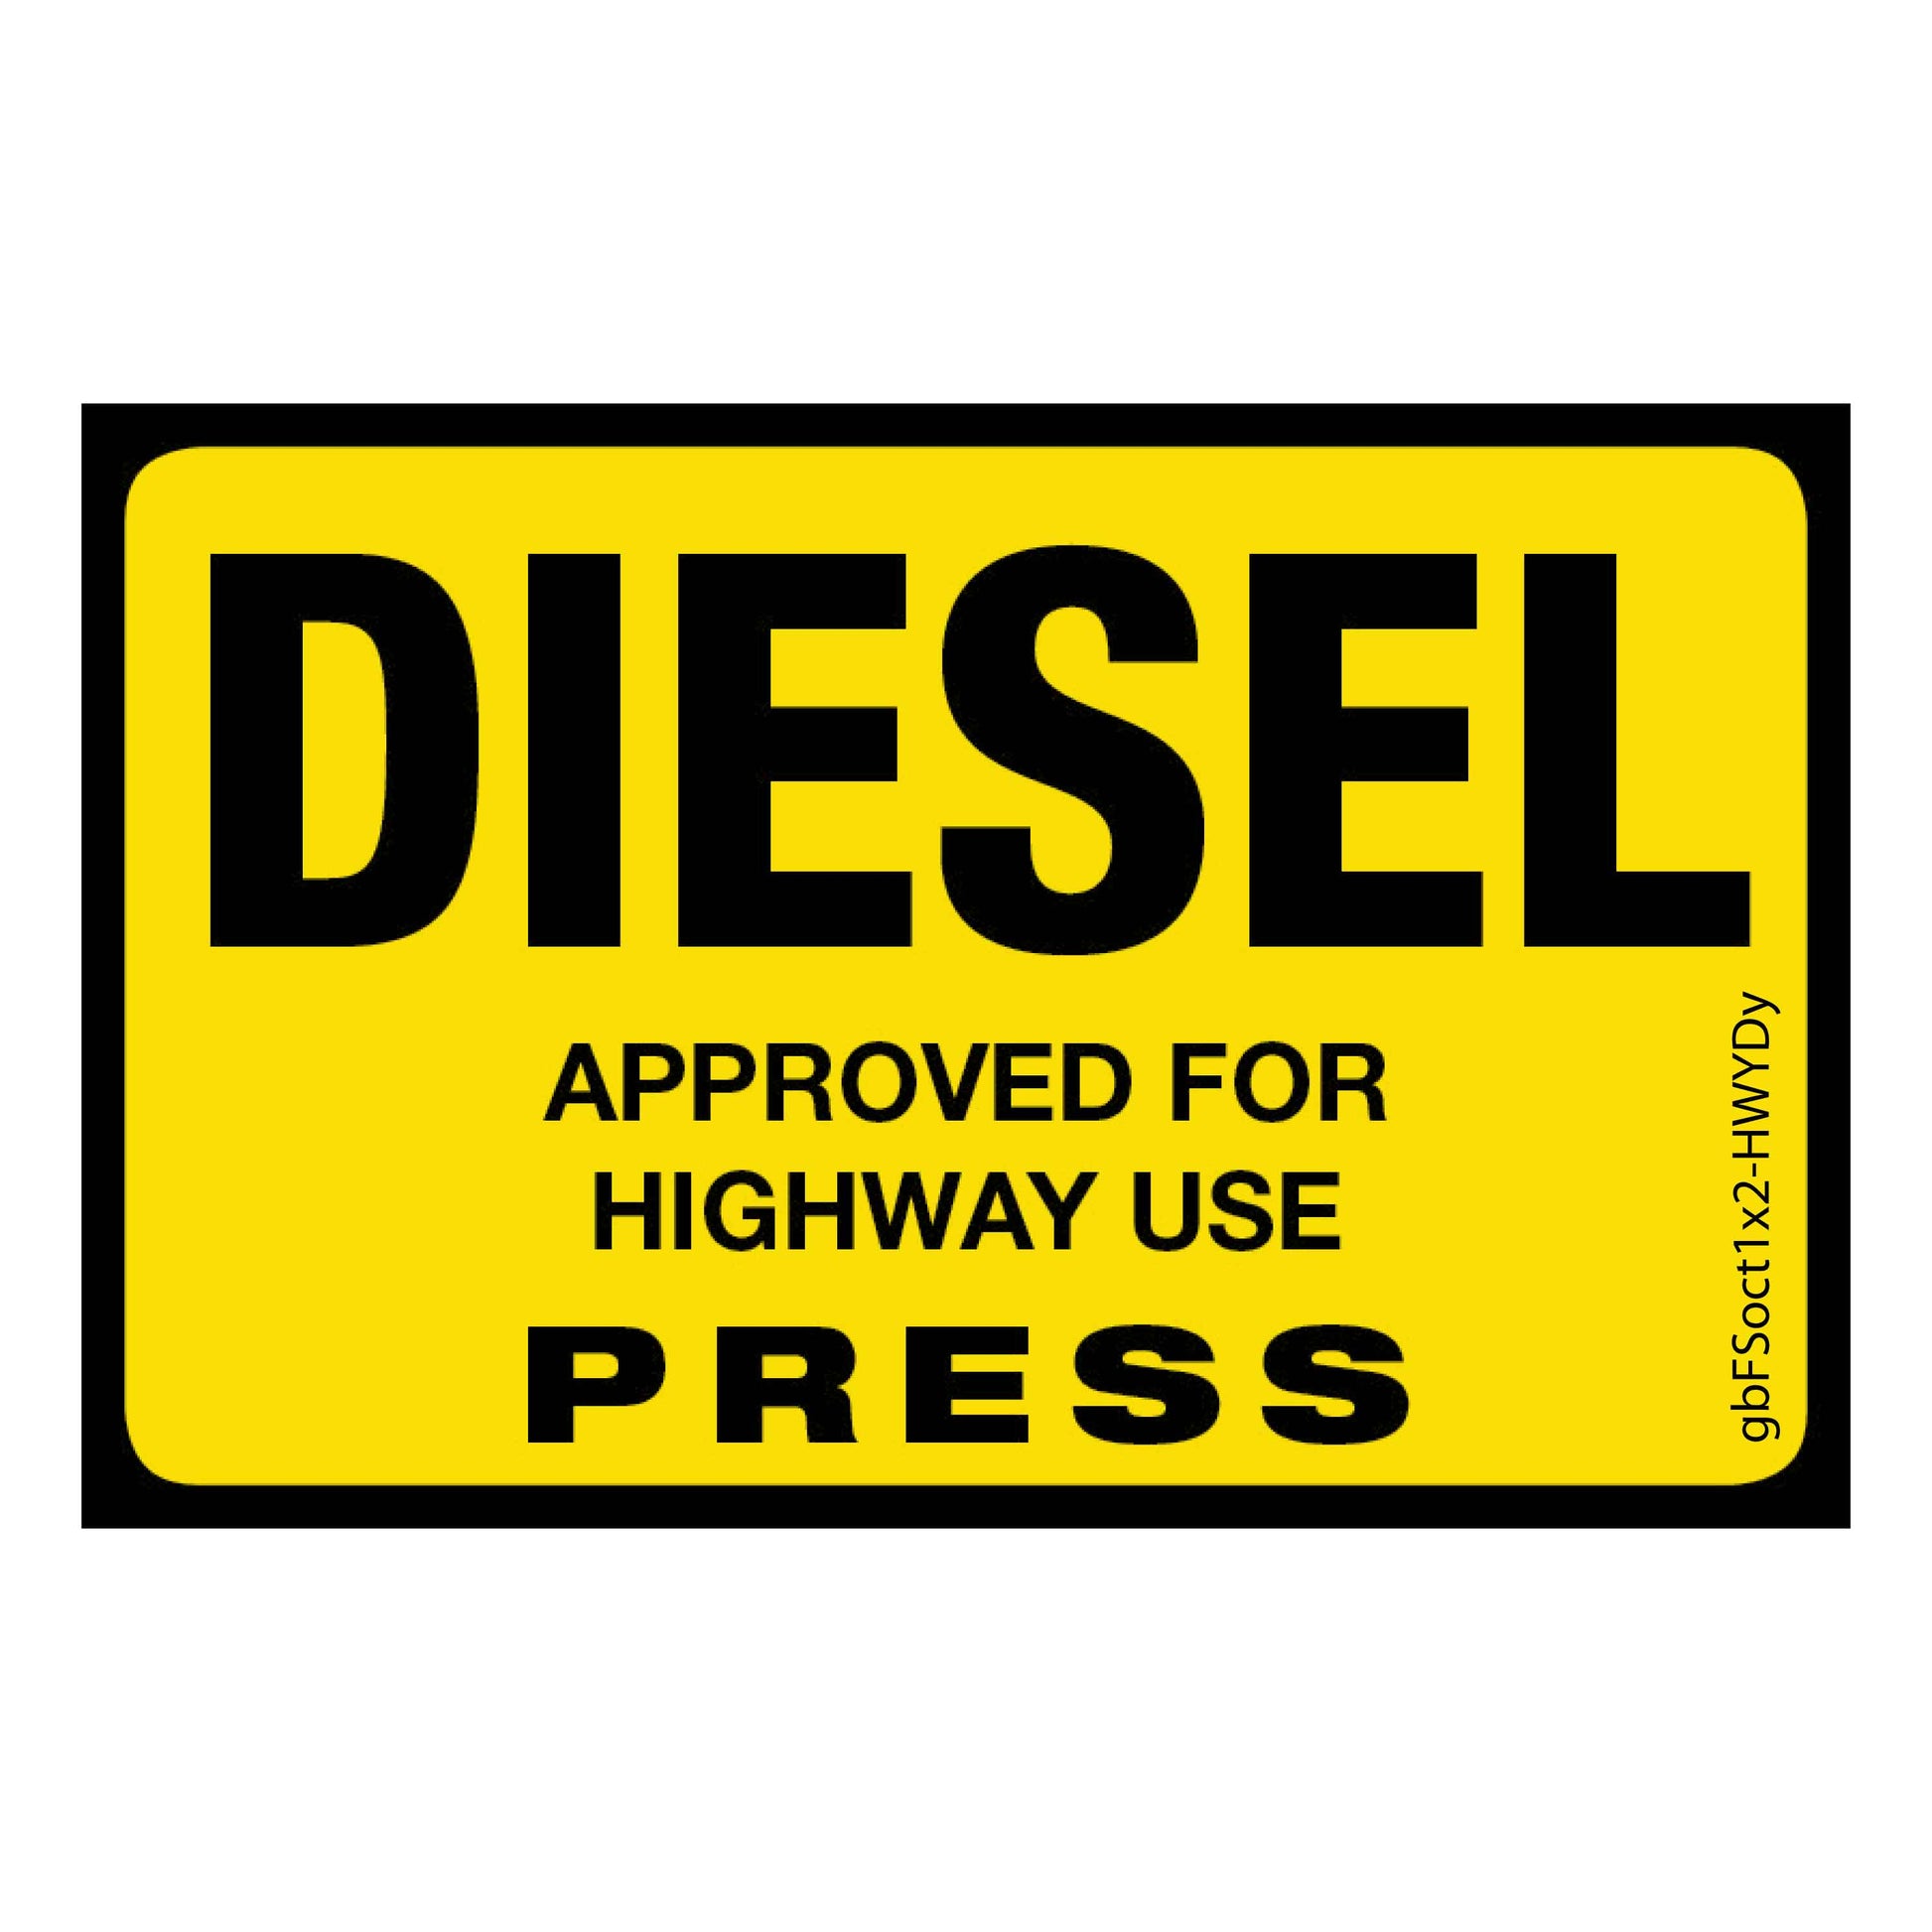 Diesel (On Road) Press Octane Rating Decal, Yellow. 1 inch by 2 inches in size. 